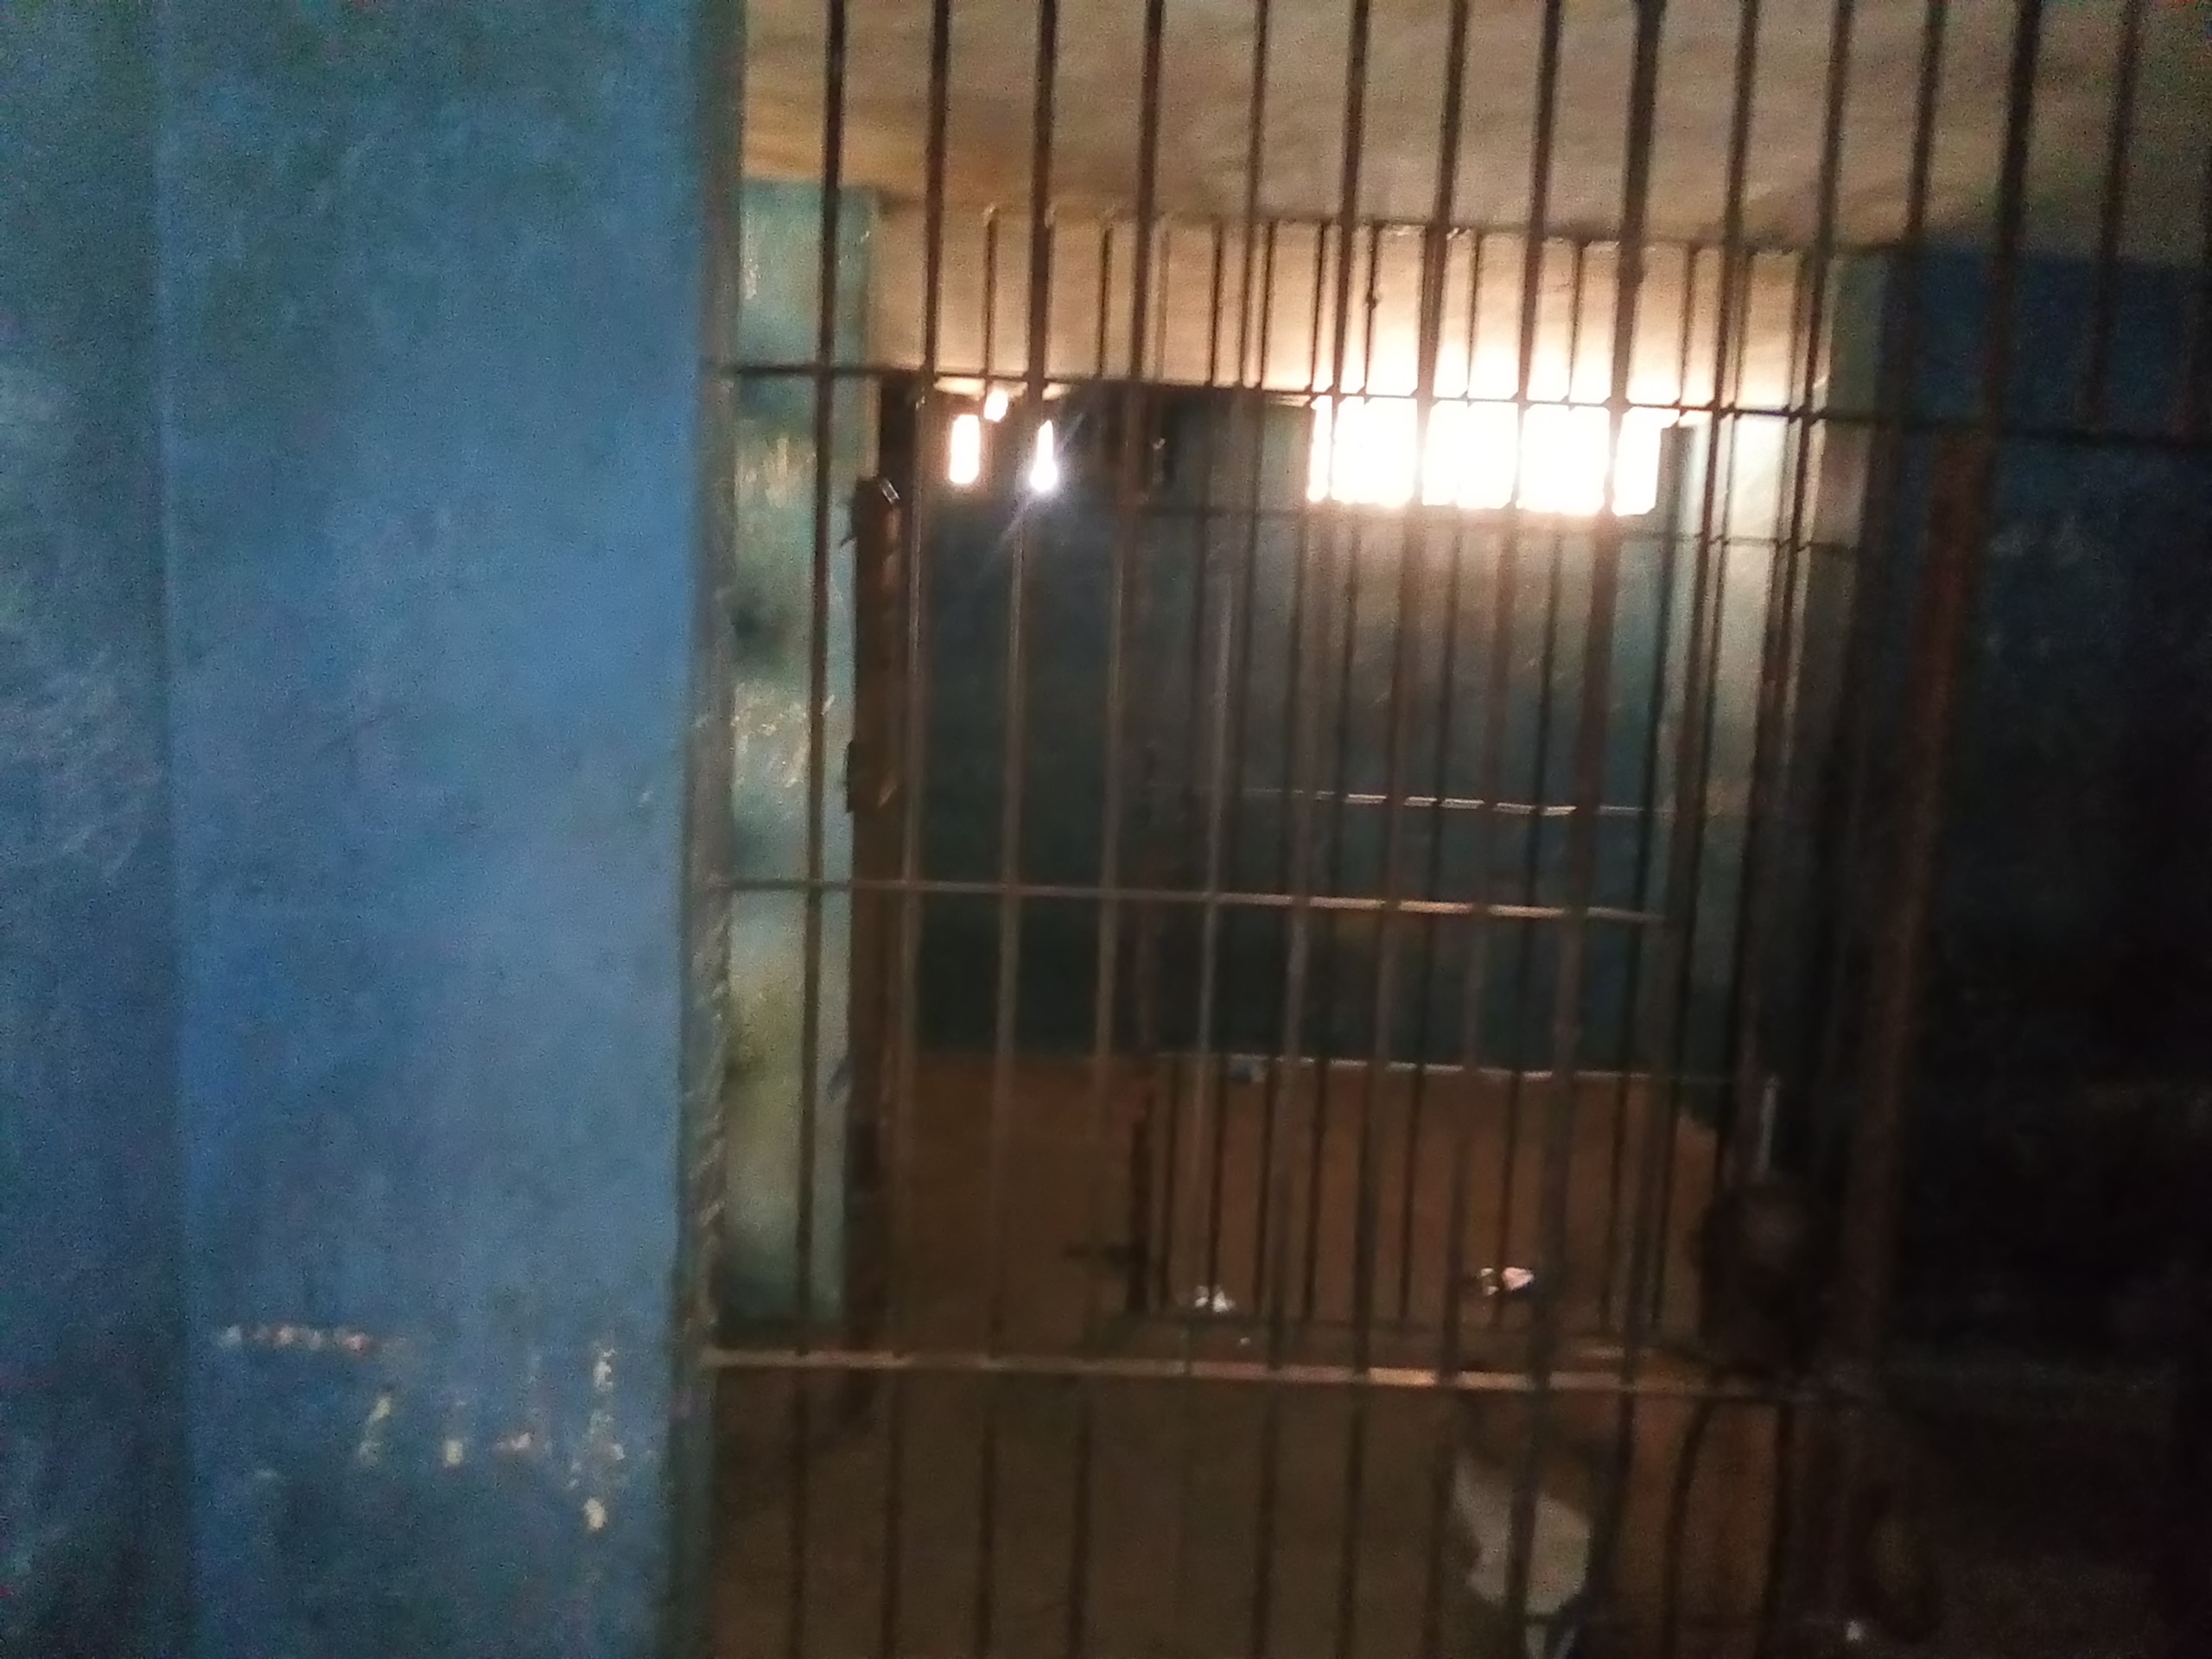 UNDERCOVER INVESTIGATION (I): Bribery, bail for sale… Lagos police station where innocent civilians are held and criminals are recycled